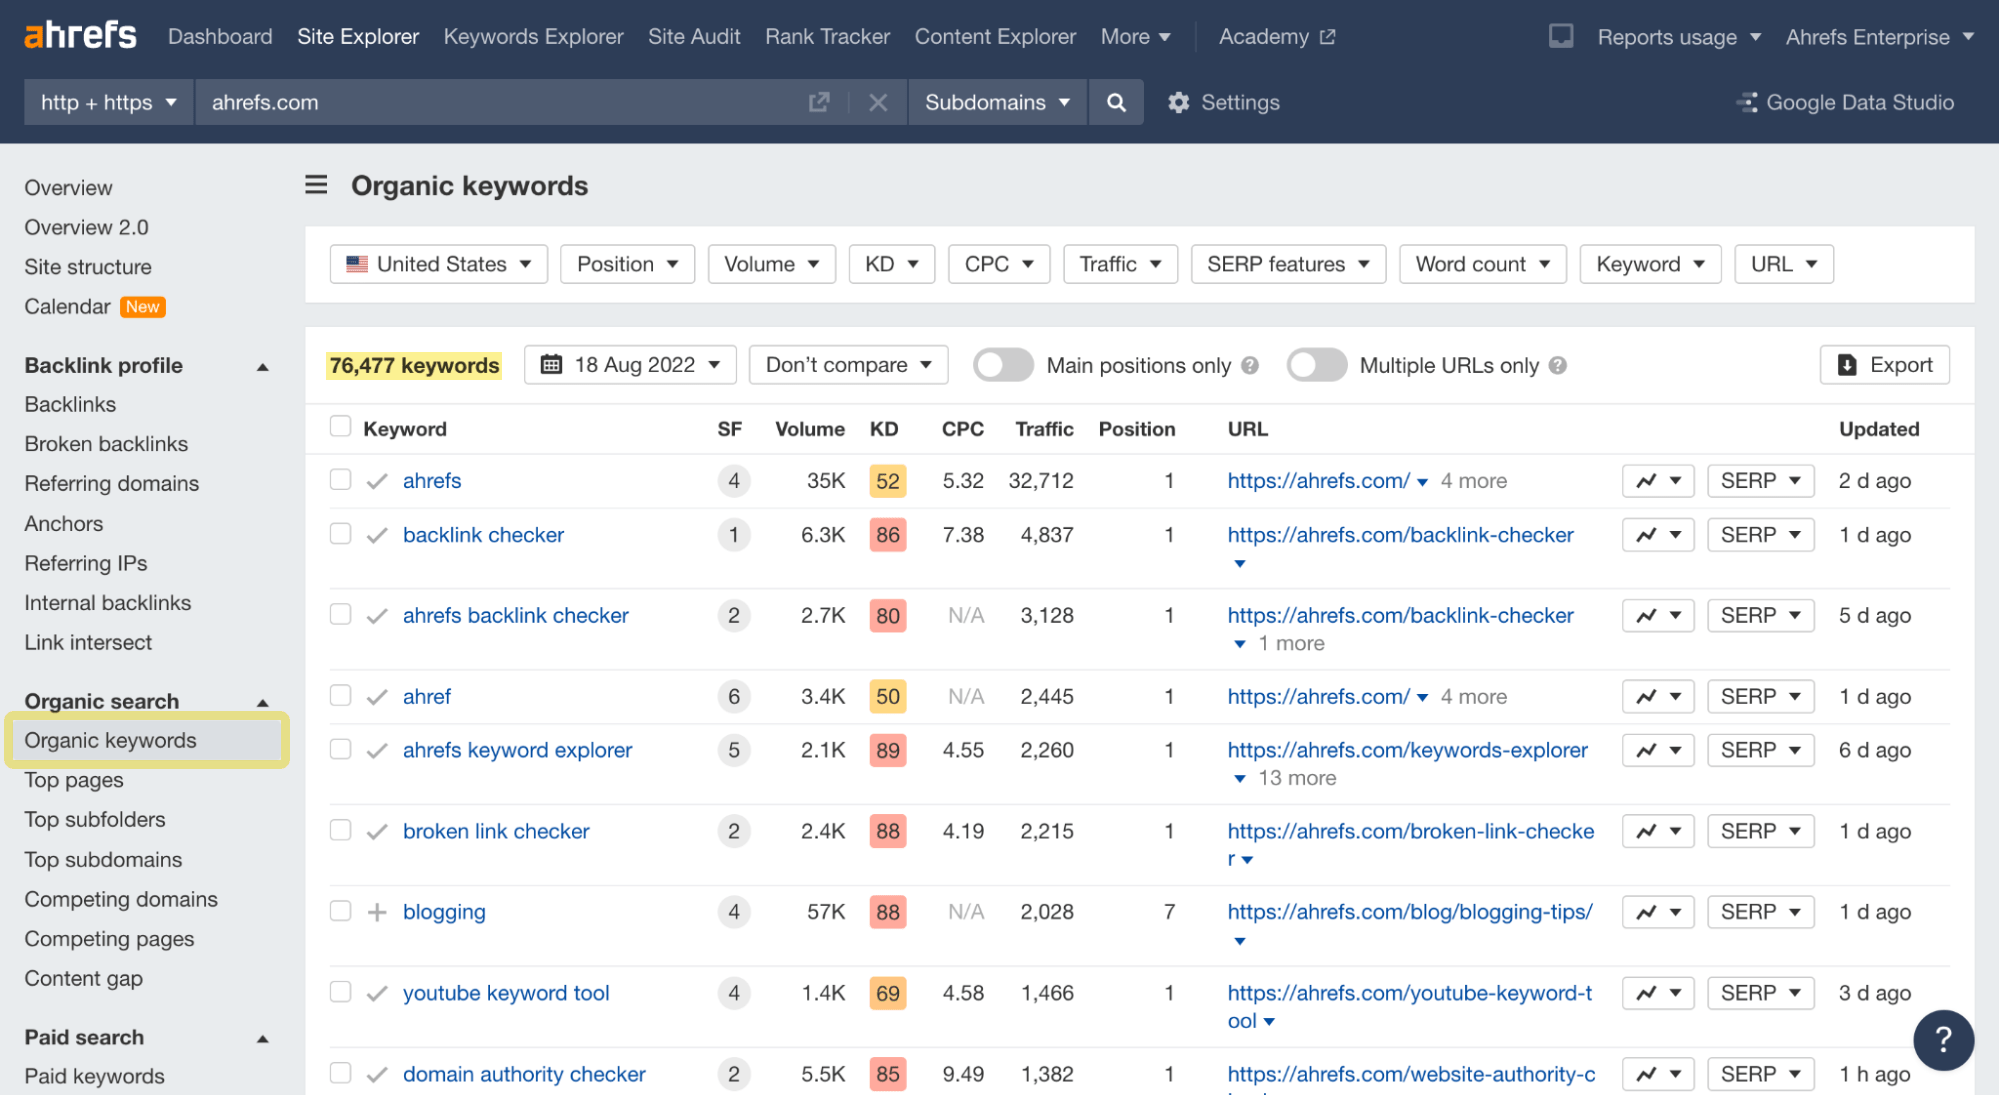 Find any website's organic keywords with Ahrefs' Site Explorer